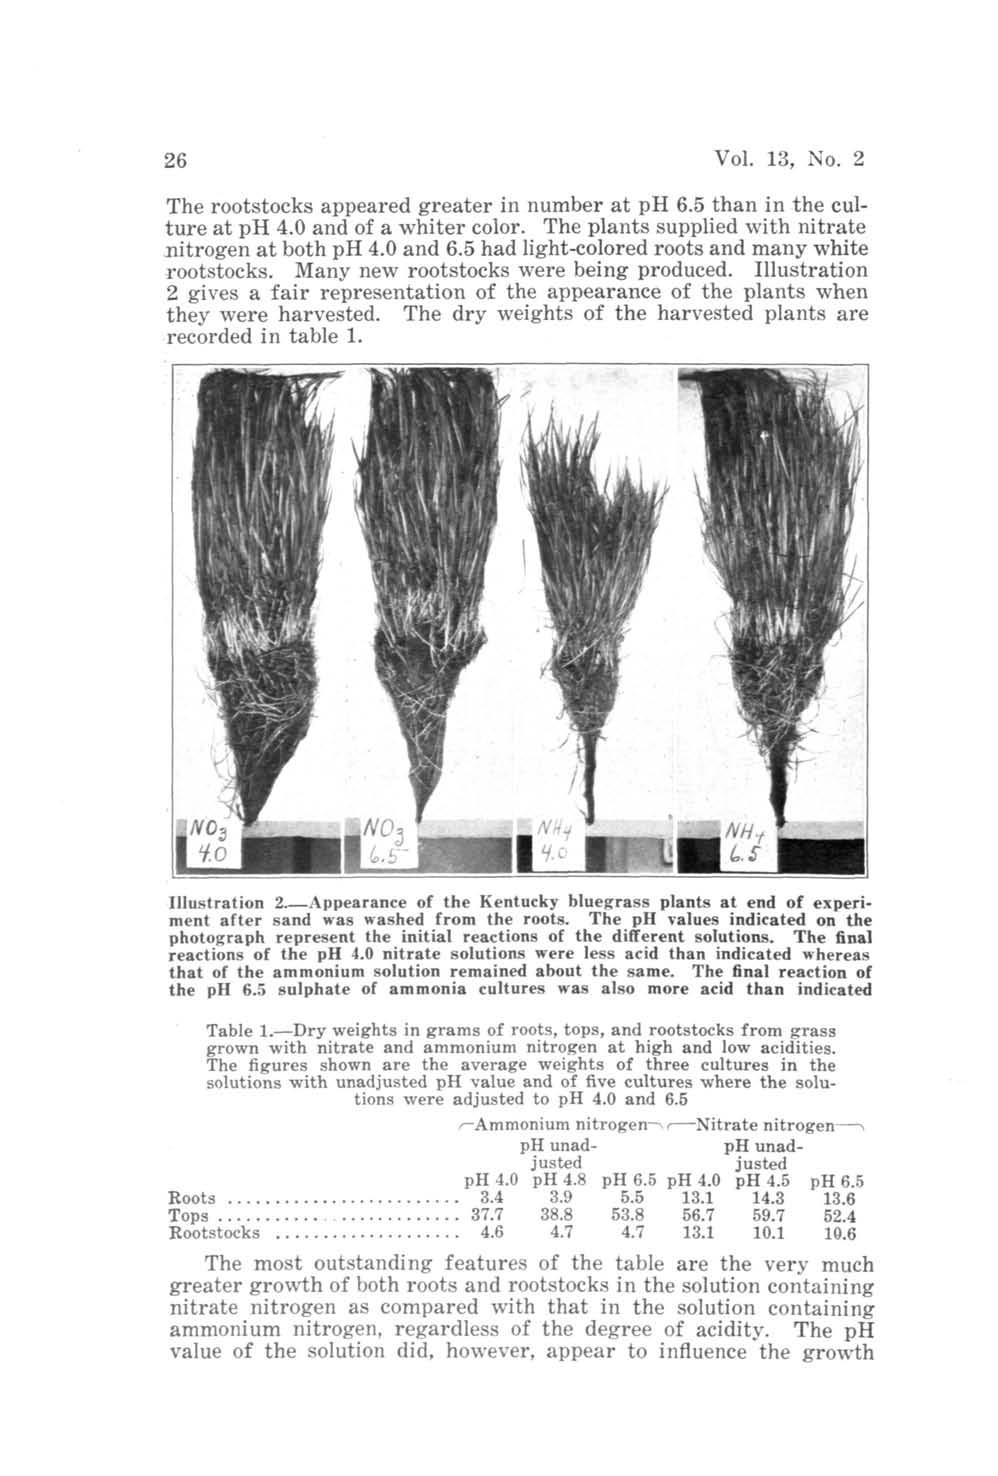 26 Vol. 13, No. 2 The rootstocks appeared greater in number at ph 6.5 than in the culture at ph 4.0 and of a whiter color. The plants supplied with nitrate nitrogen at both ph 4.0 and 6.